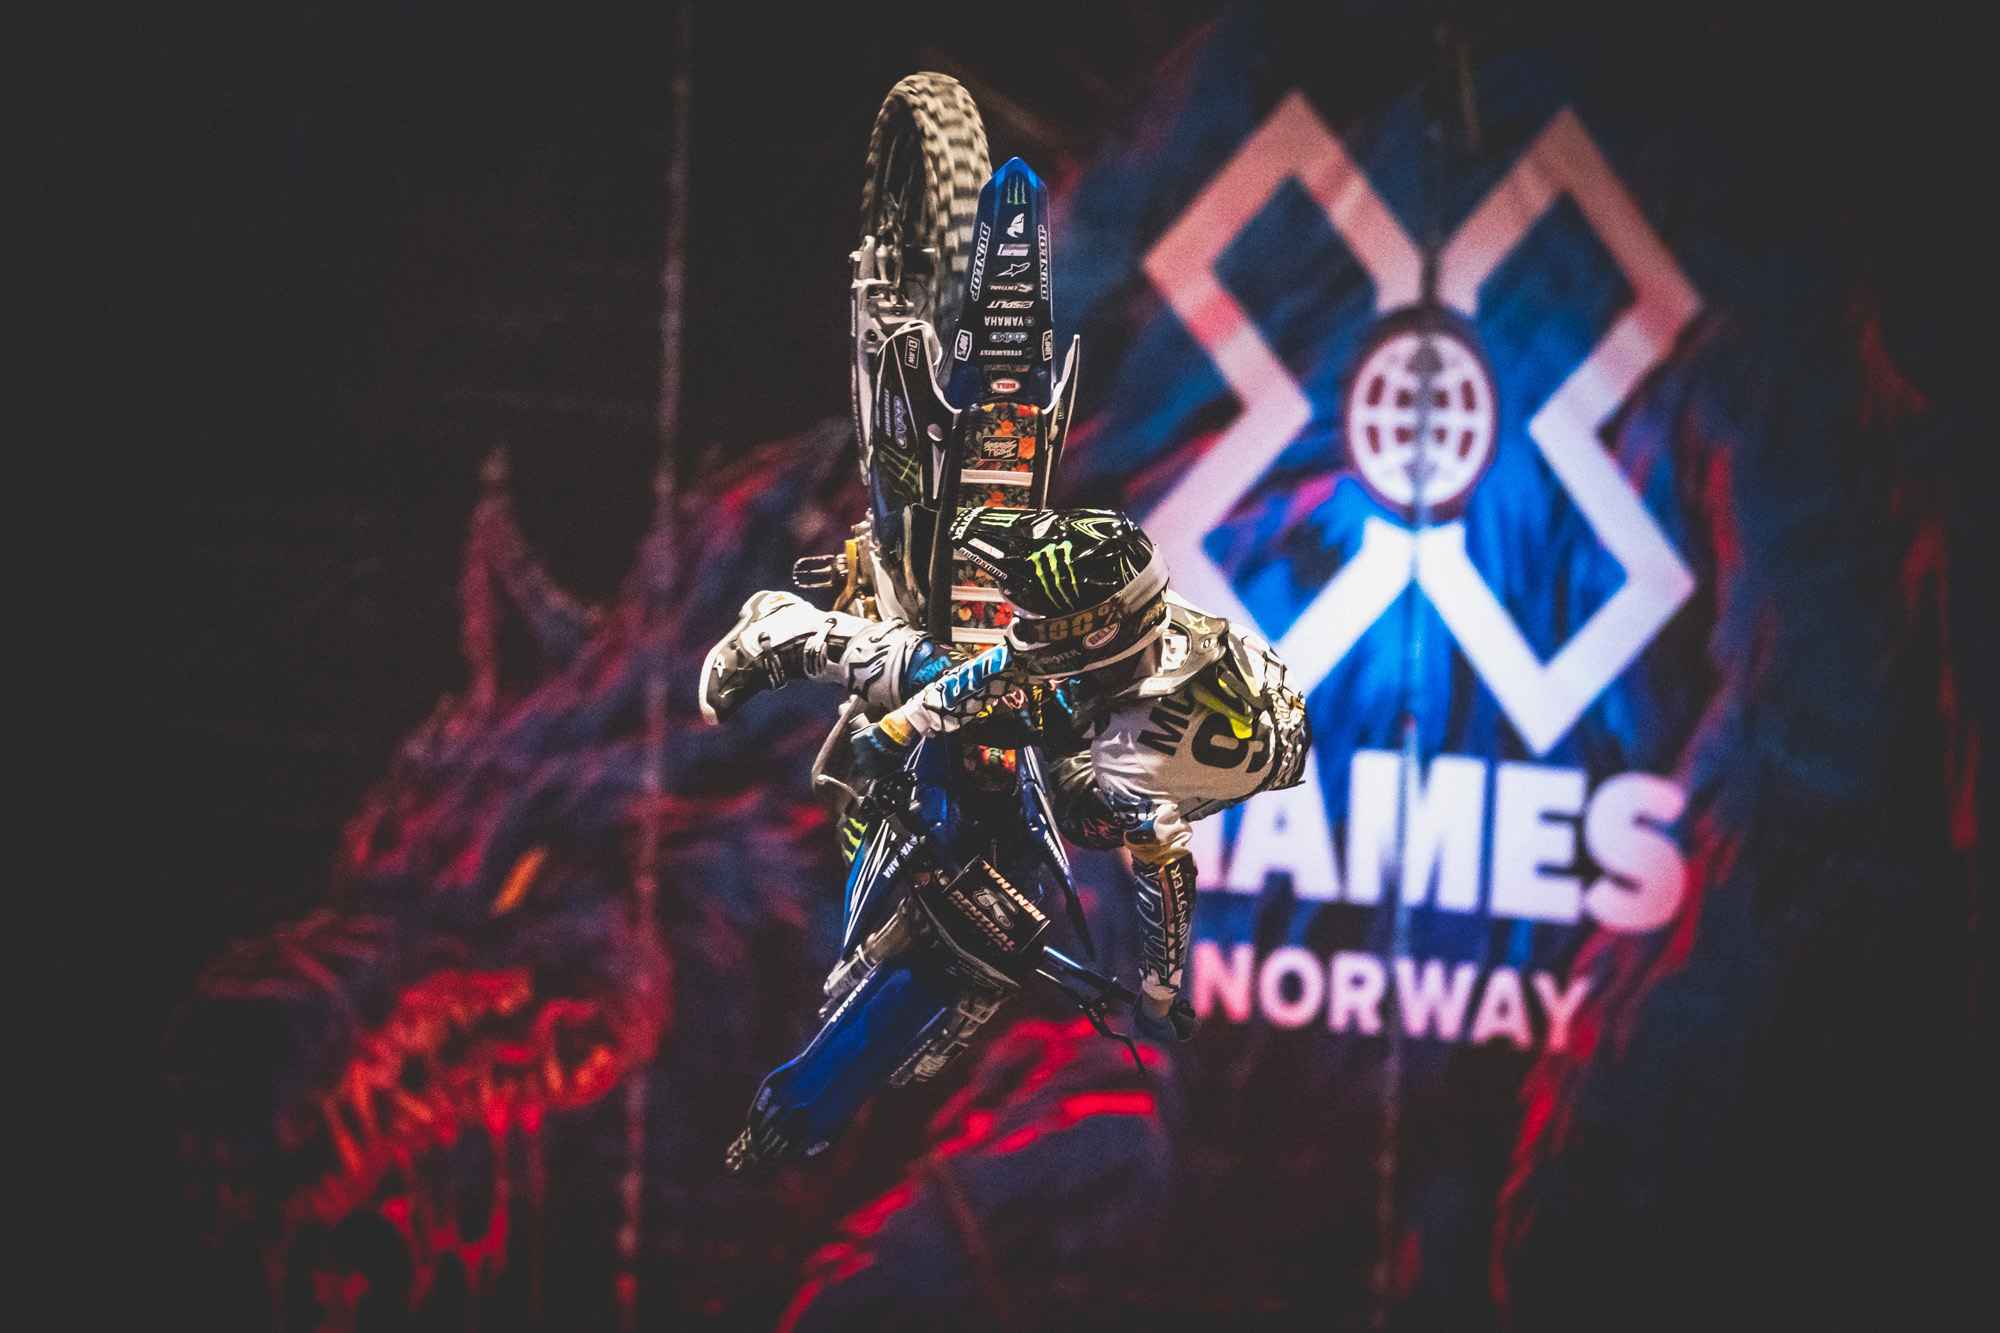 Monster Energy's Jarryd McNeil Claims Gold in Moto X Best Whip at X Games Norway 2019